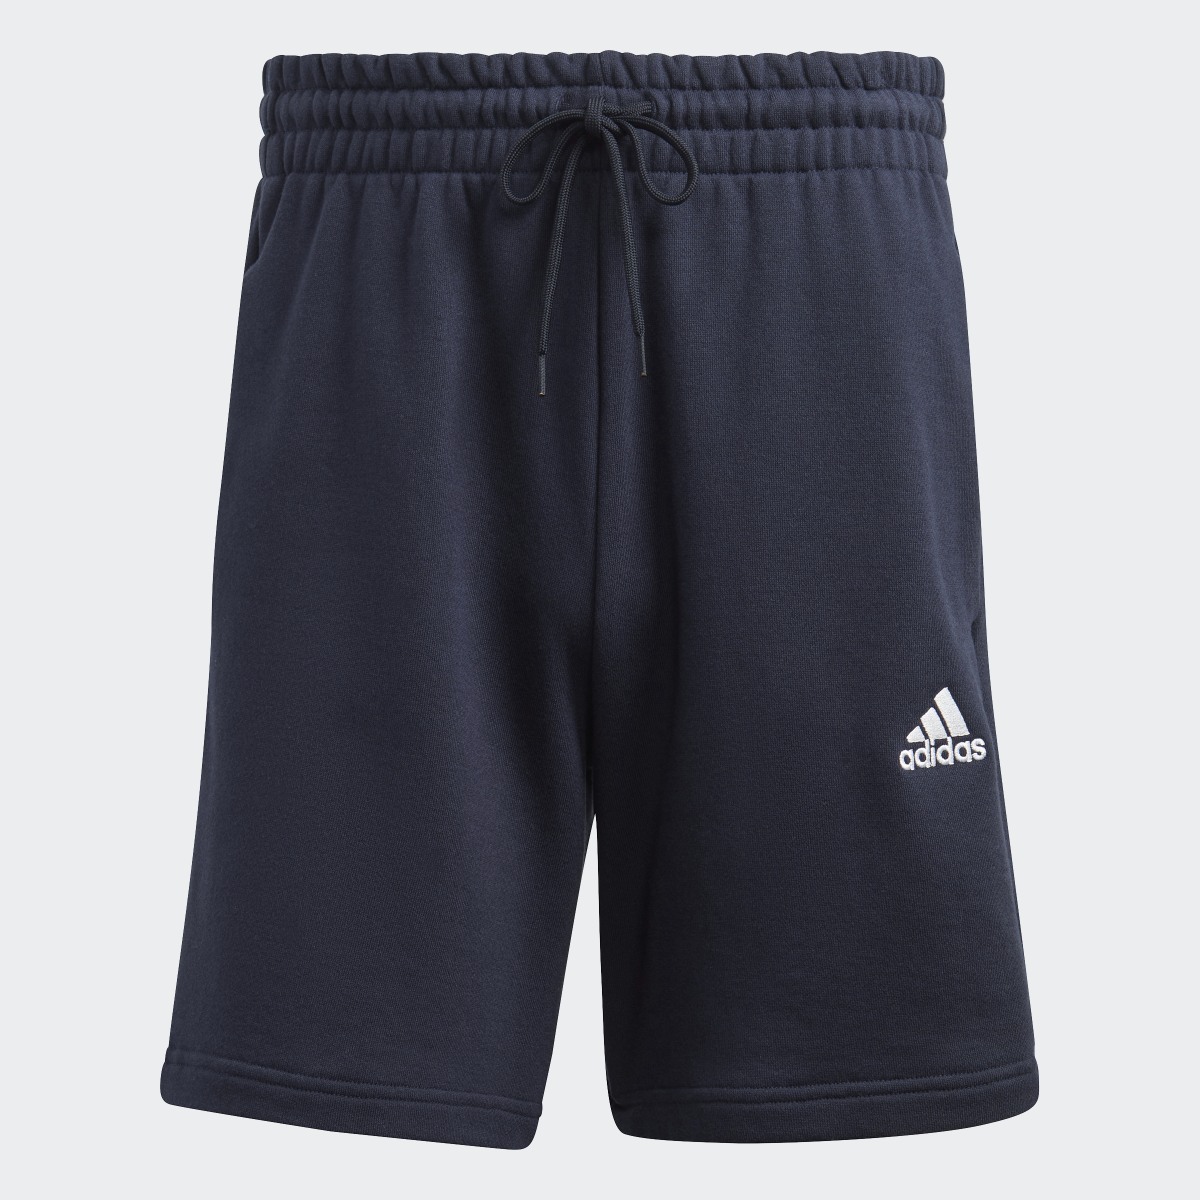 Adidas Essentials French Terry 3-Stripes Shorts. 4